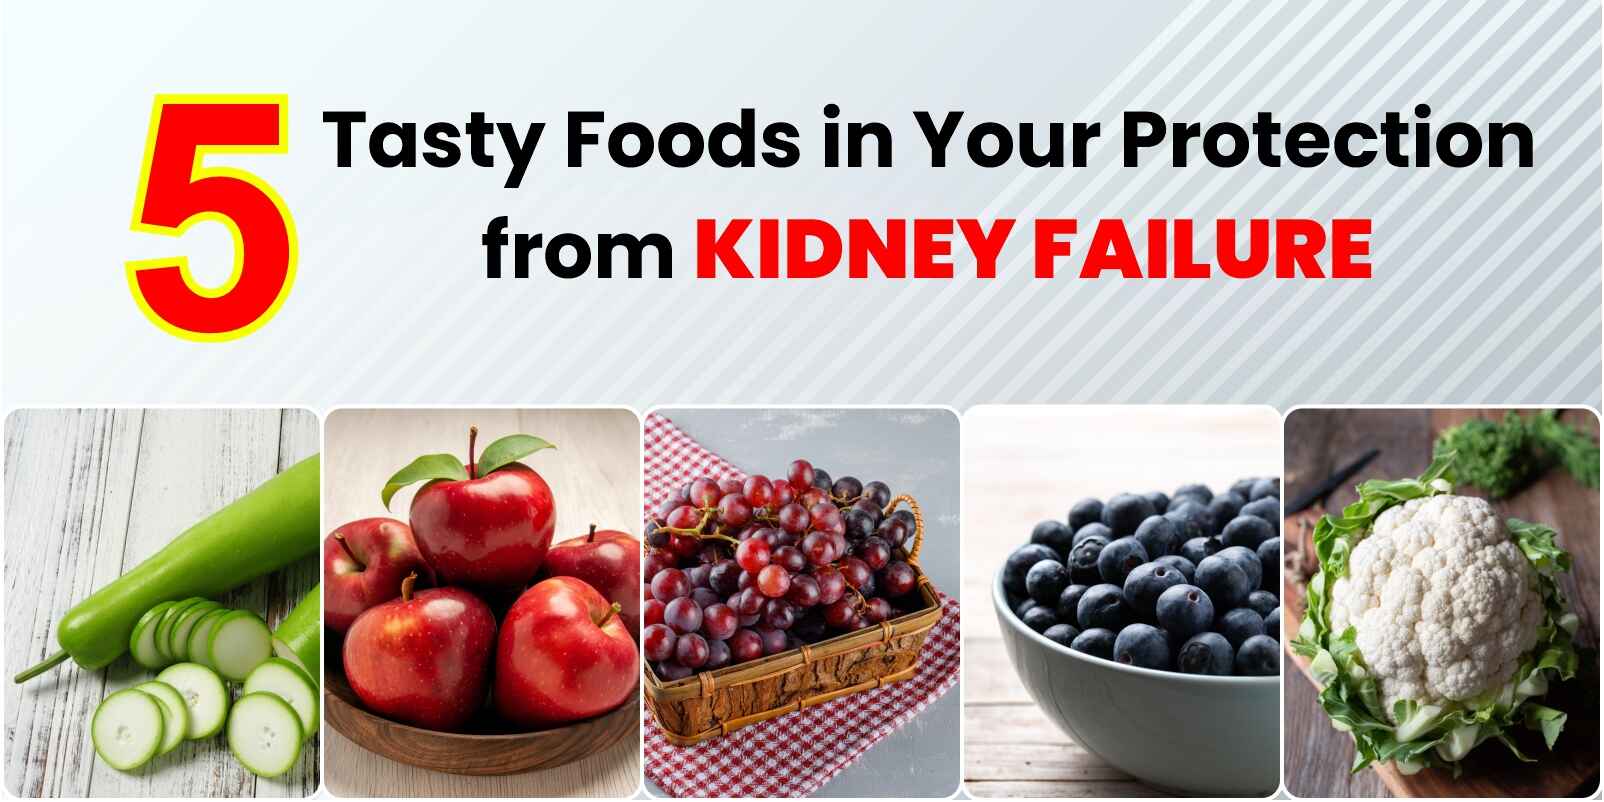 5 Tasty Foods in Your Protection from Kidney Failure